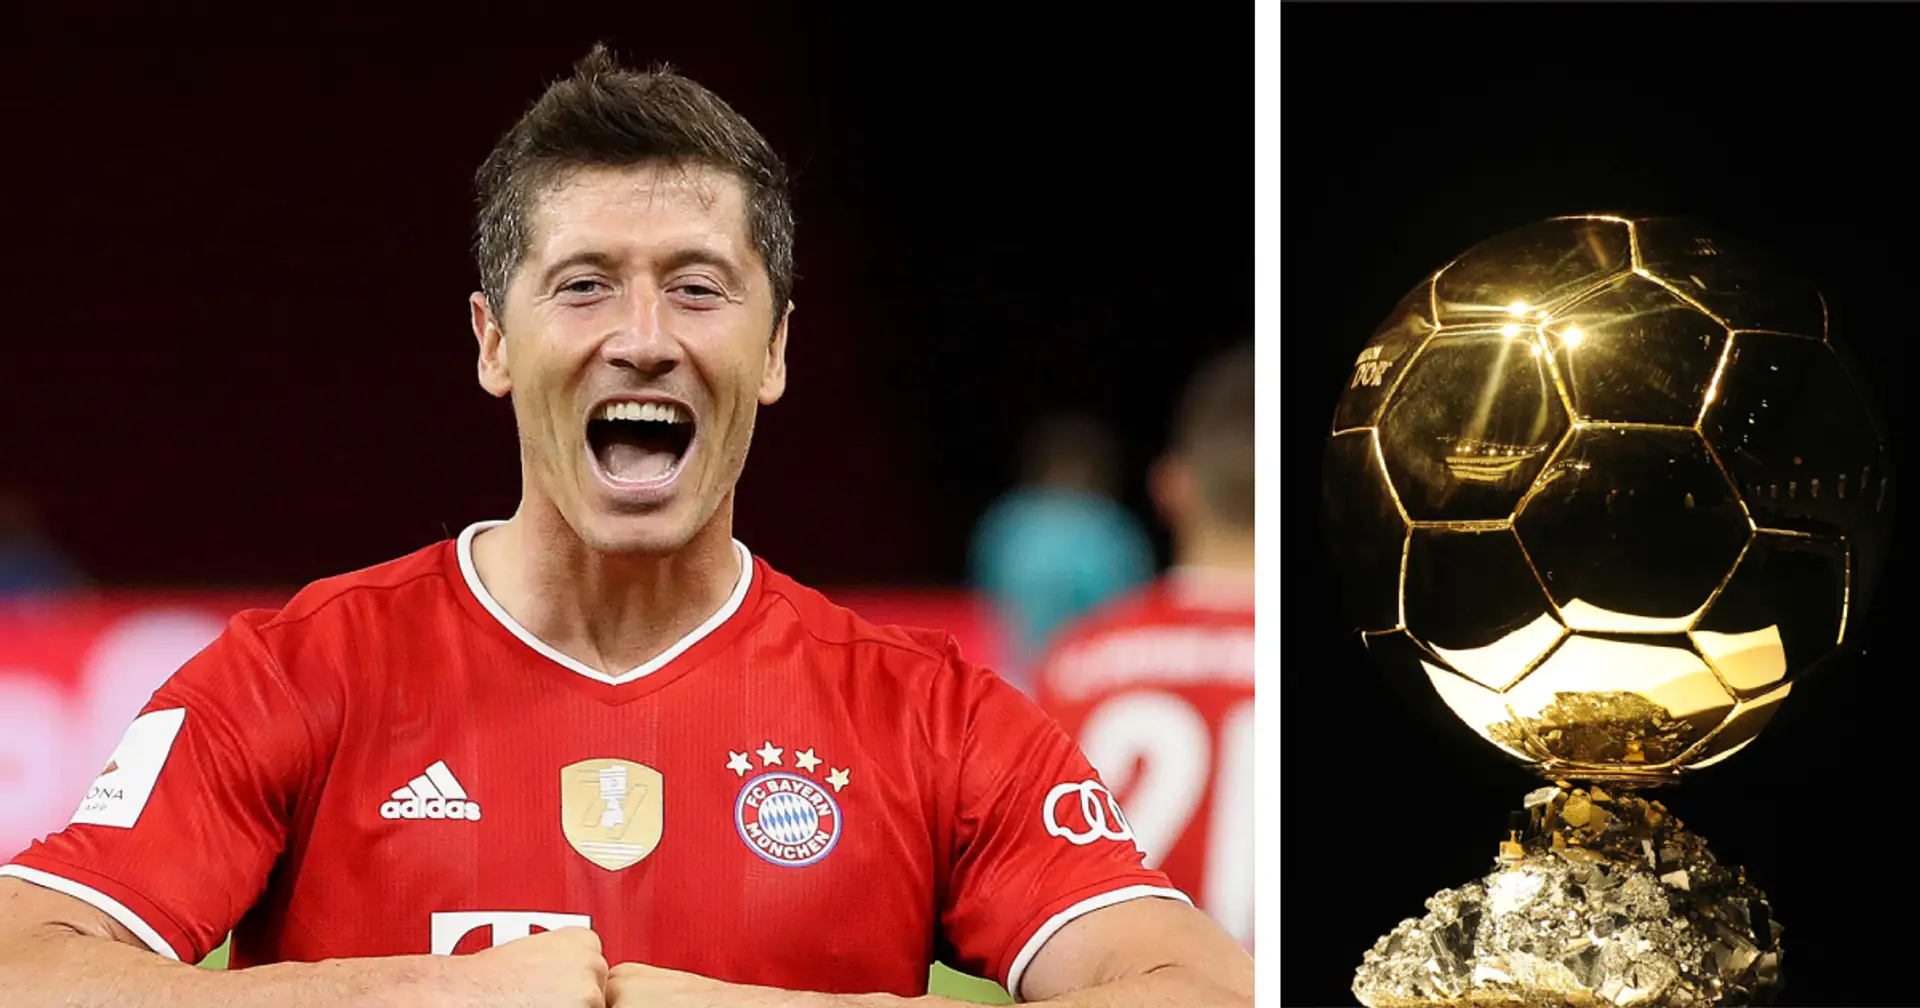 Why Robert Lewandowski was robbed out of Ballon d'Or award: explained in 6 key points